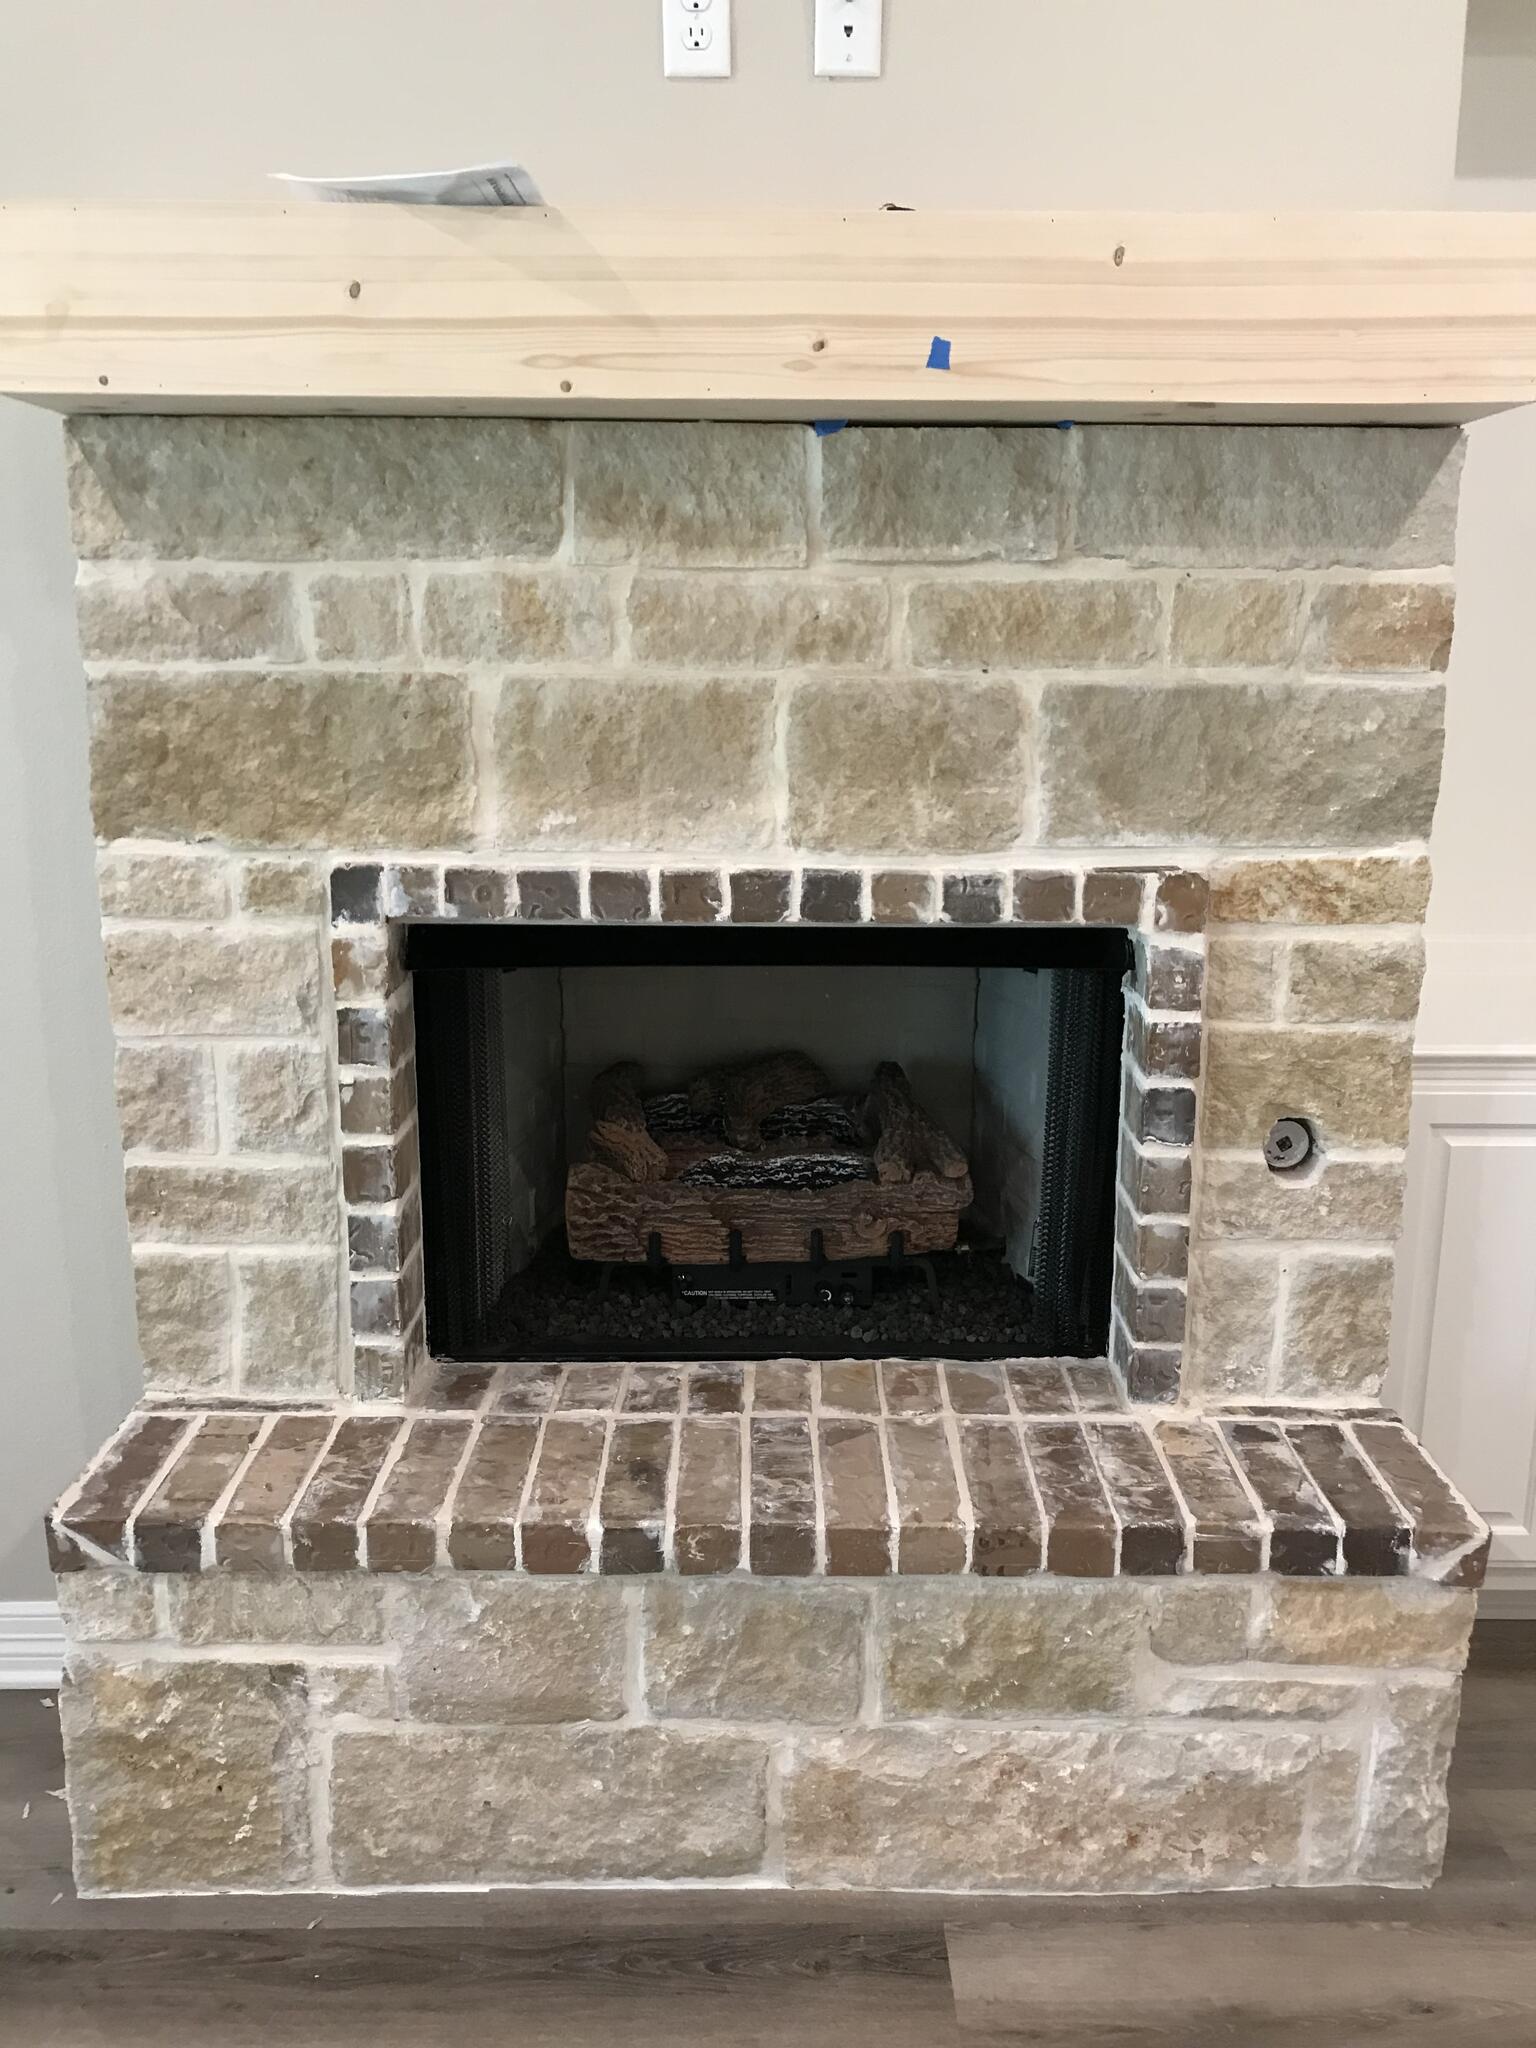 Fireplace Panel Replacement - Texan Residential Services